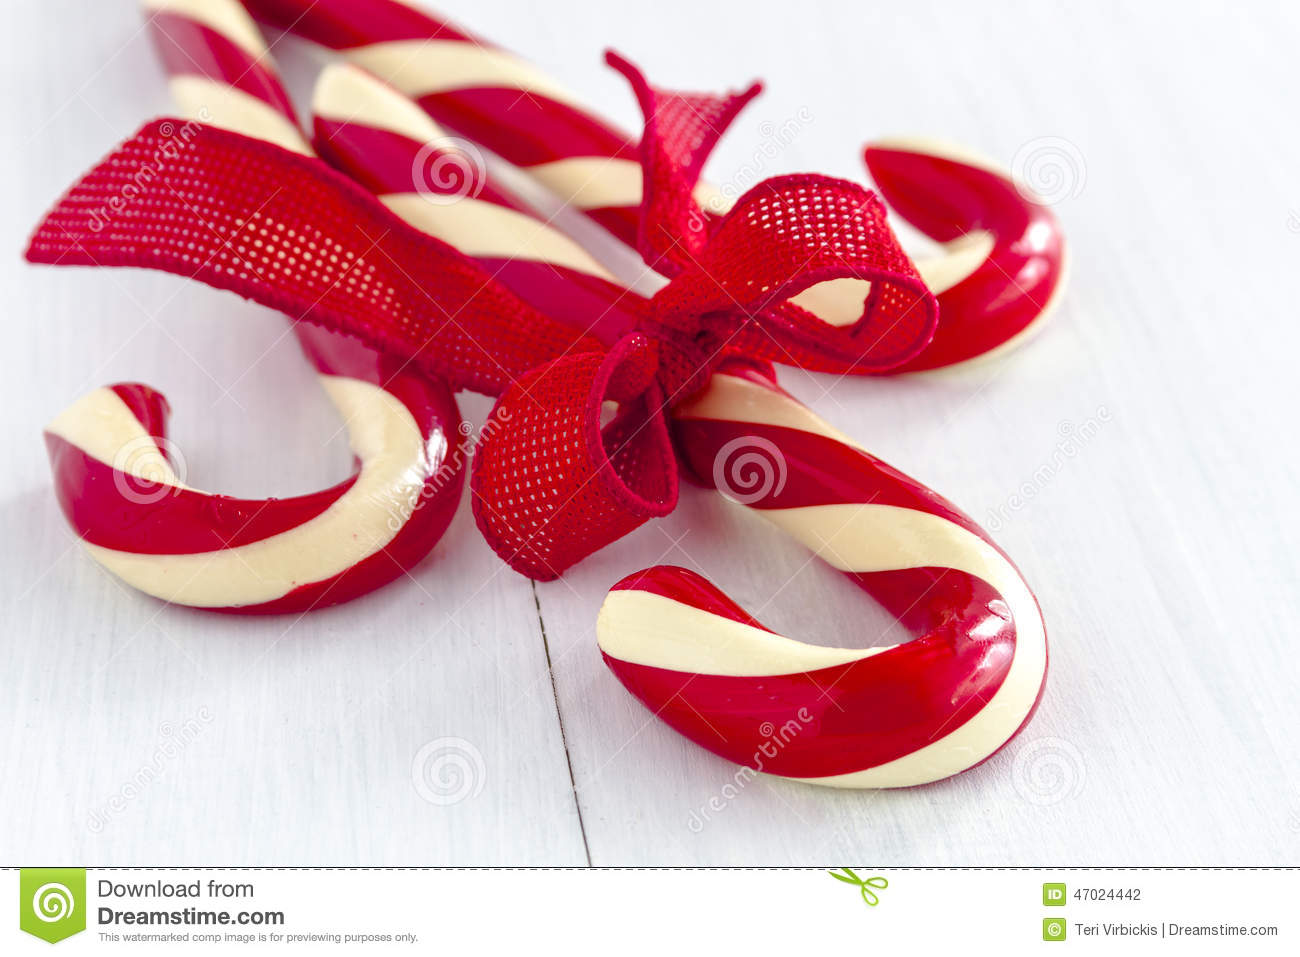     Candy Canes Tied With Red Burlap Ribbon Sitting On White Wooden Table